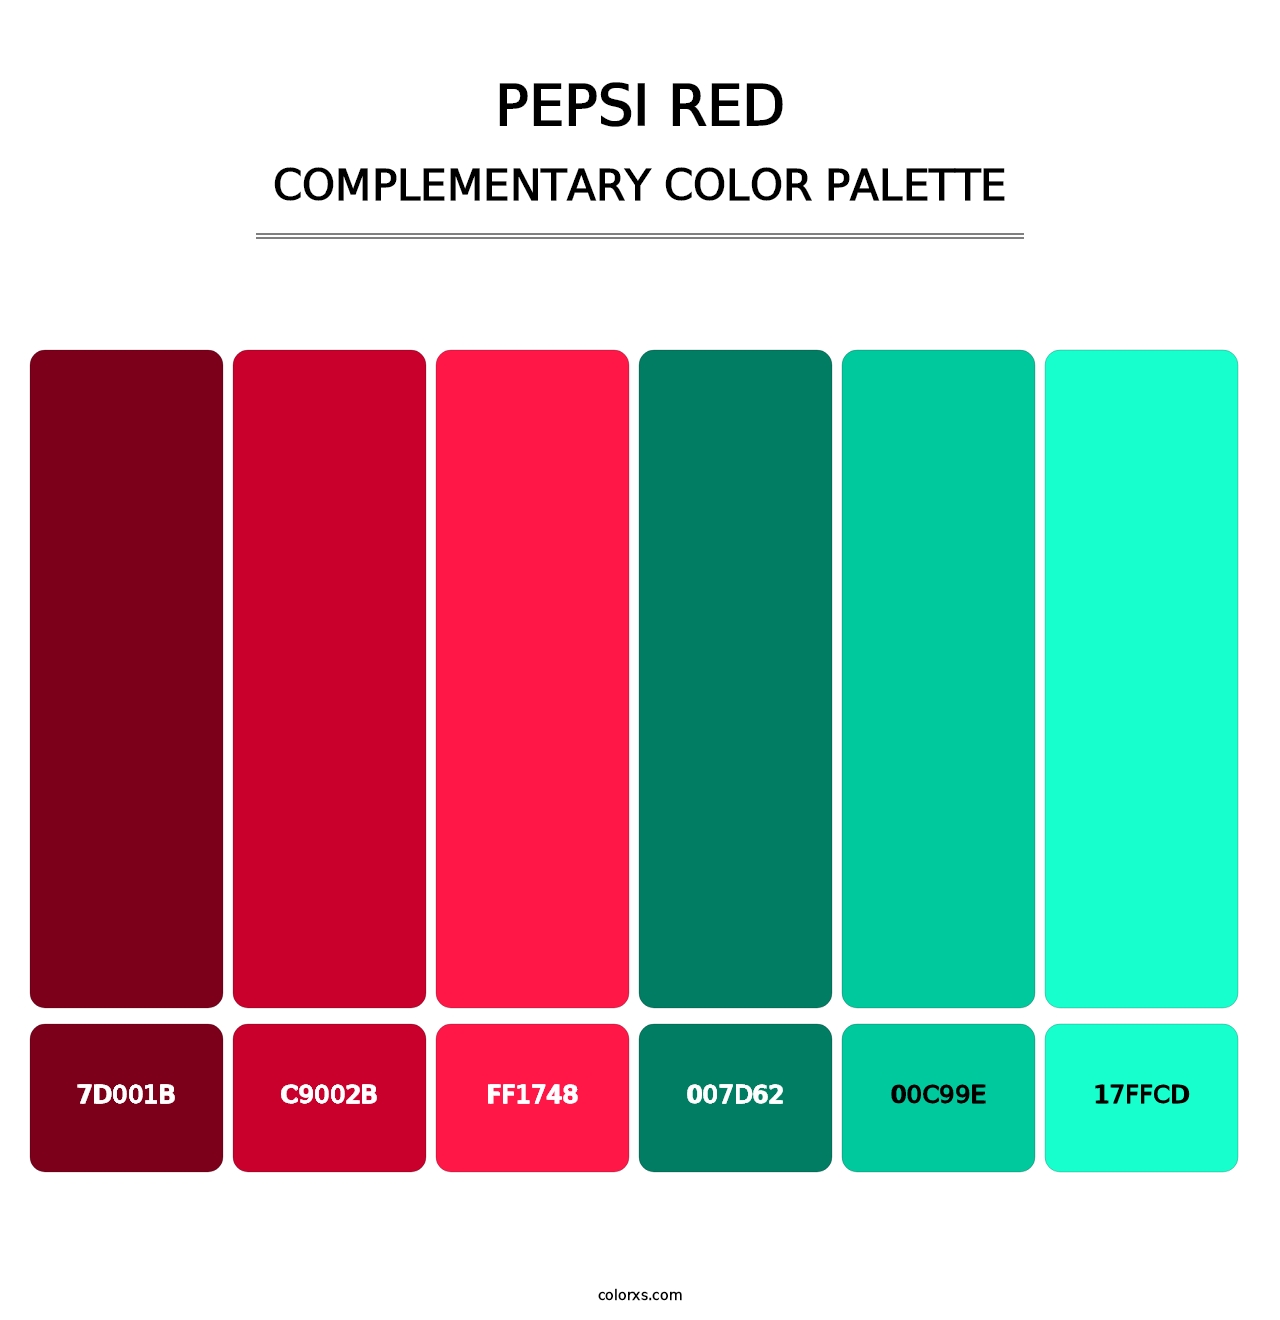 Pepsi Red - Complementary Color Palette